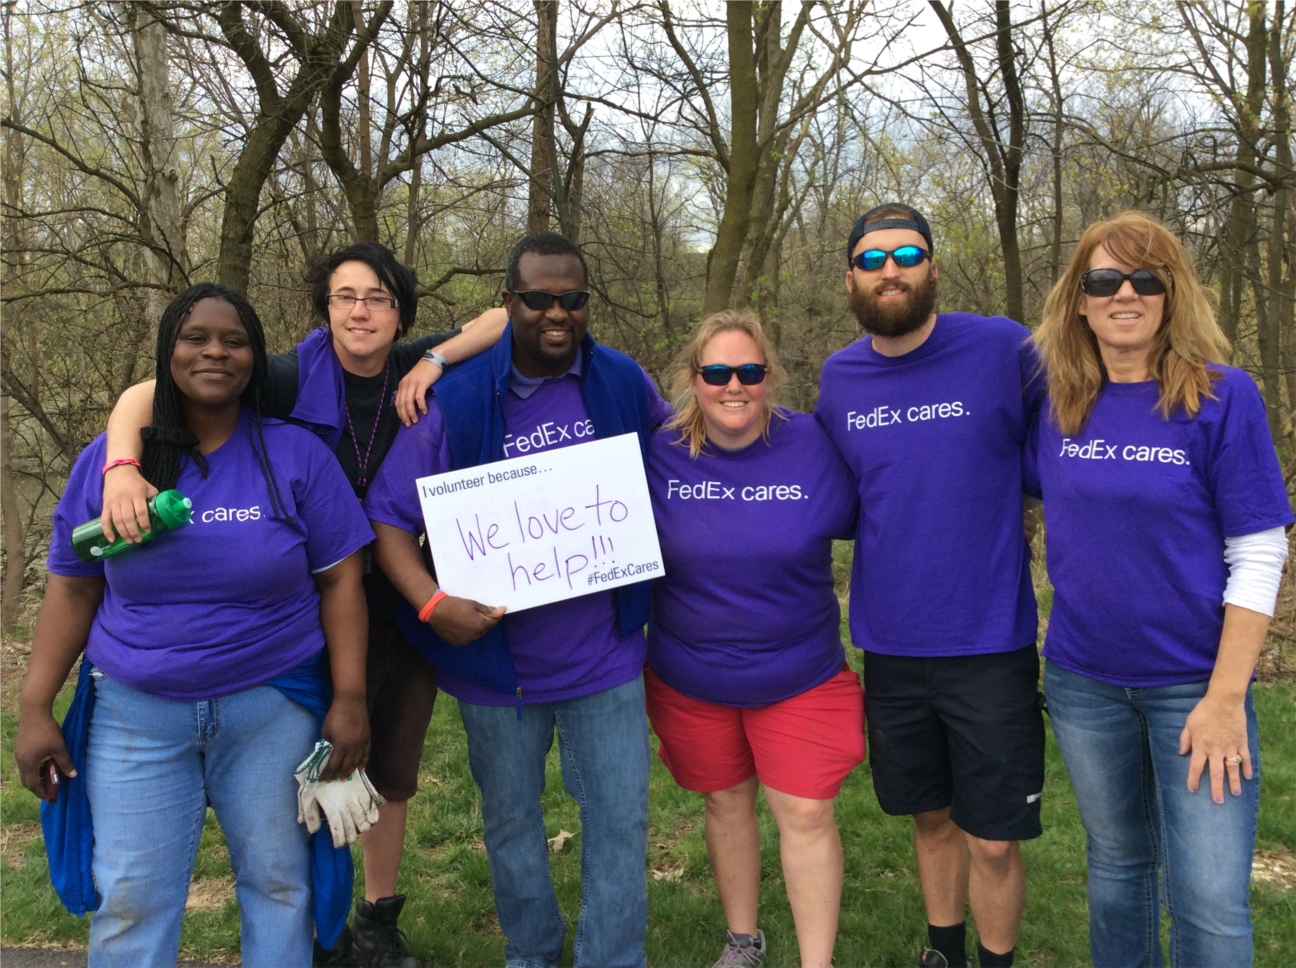 FedEx employees joined forces with Keep Indianapolis Beautiful planting trees in Indianapolis as part of the the company's annual "EarthSmart" campaign. 